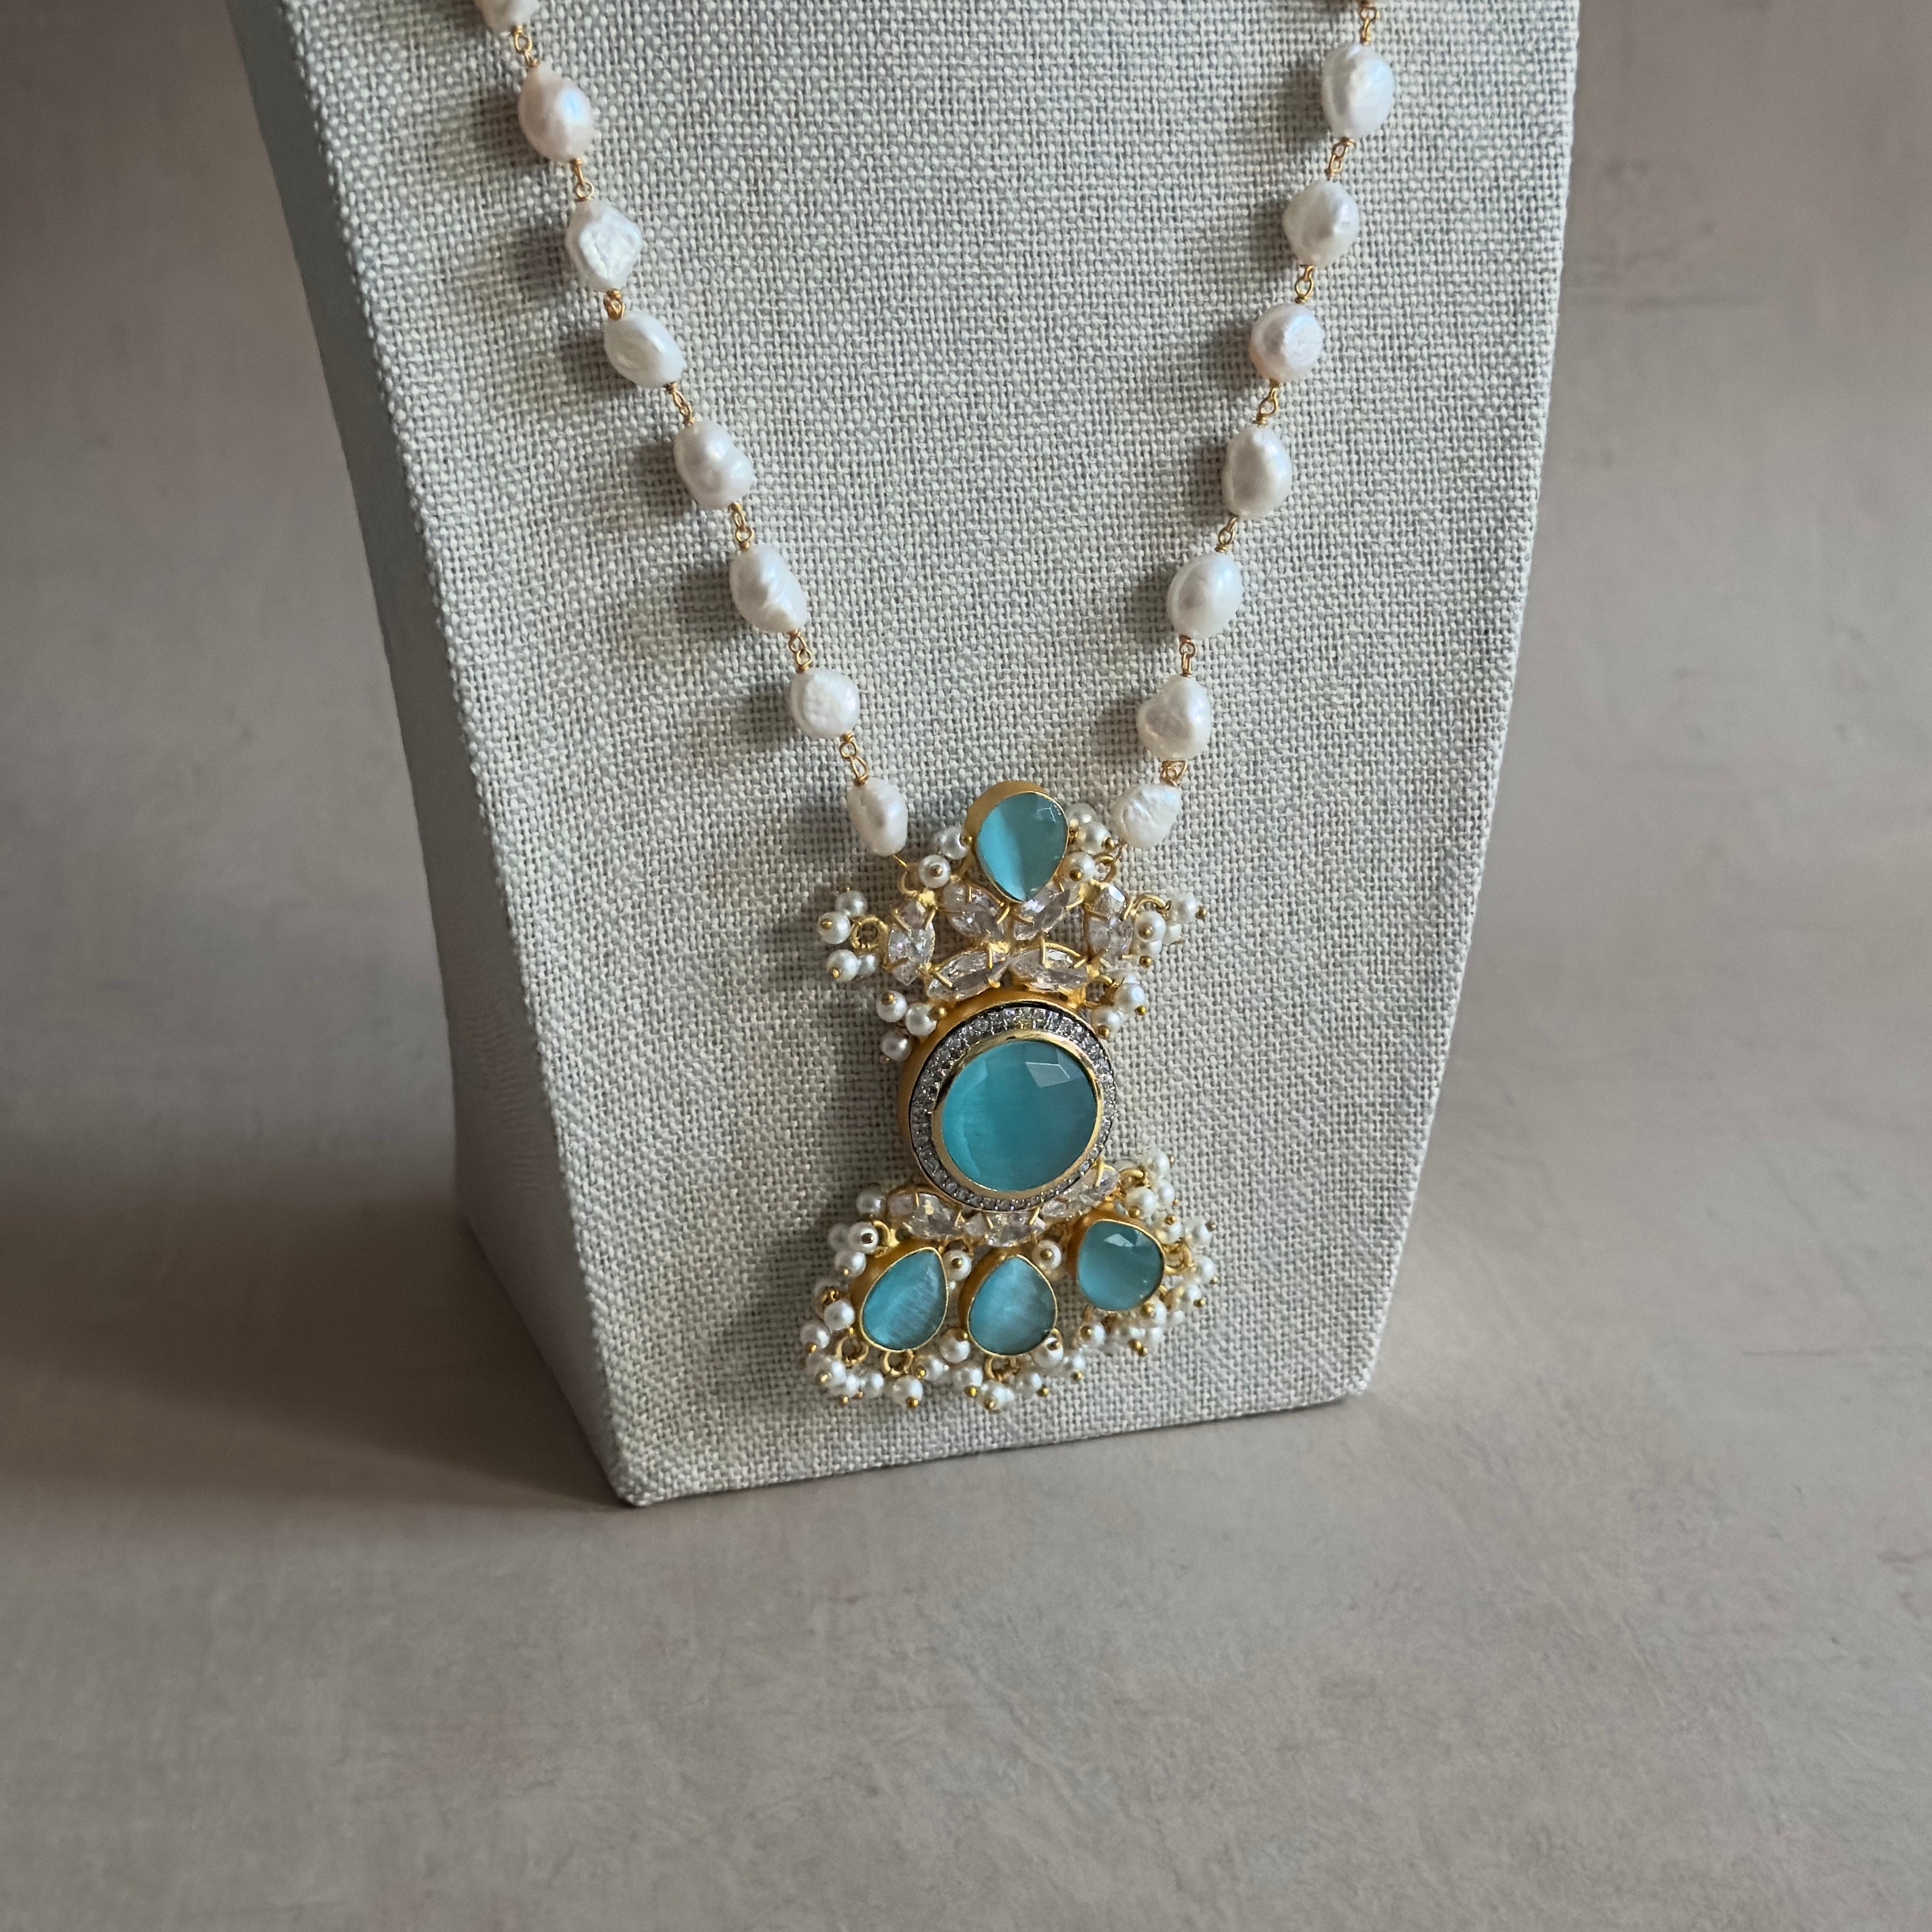 Elevate your style with our Amelia Blue Mala Set! This stunning long necklace set features aqua blue stones and sparkling cz crystals that will catch everyone's eye. Complete with matching earrings, this set is perfect for any occasion. Add a touch of elegance to your ensemble.